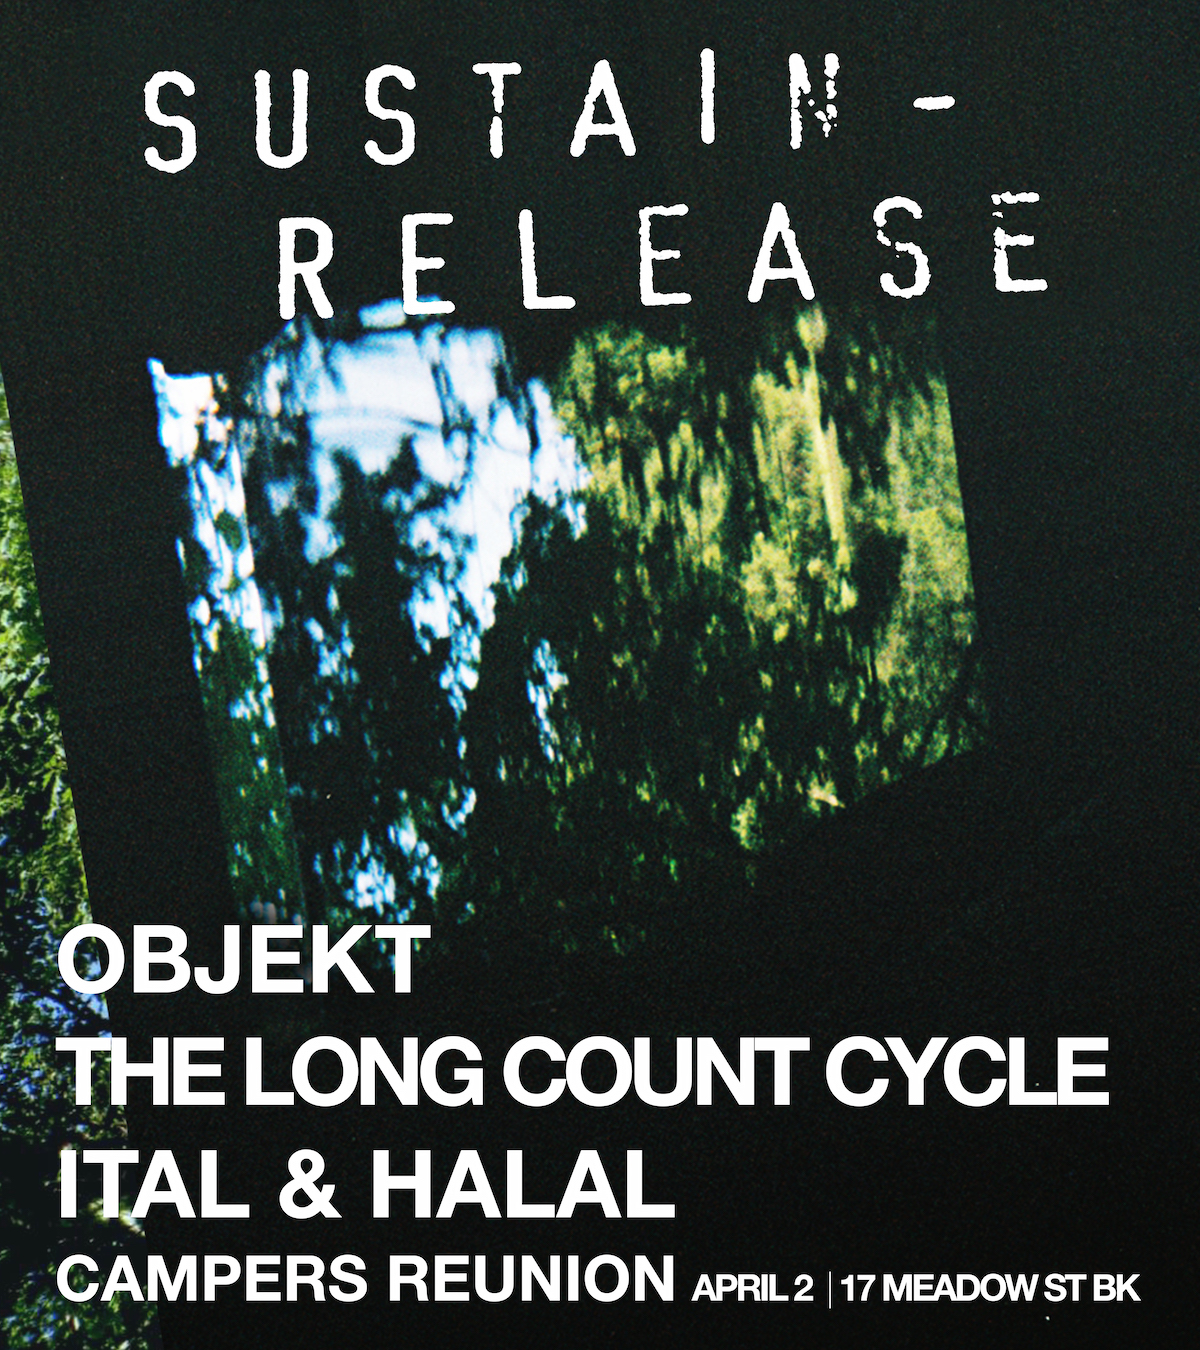    Sustain-Release Campers Reunion: Objekt, The Long Count Cycle, Ital &amp; Halal   April 2016 